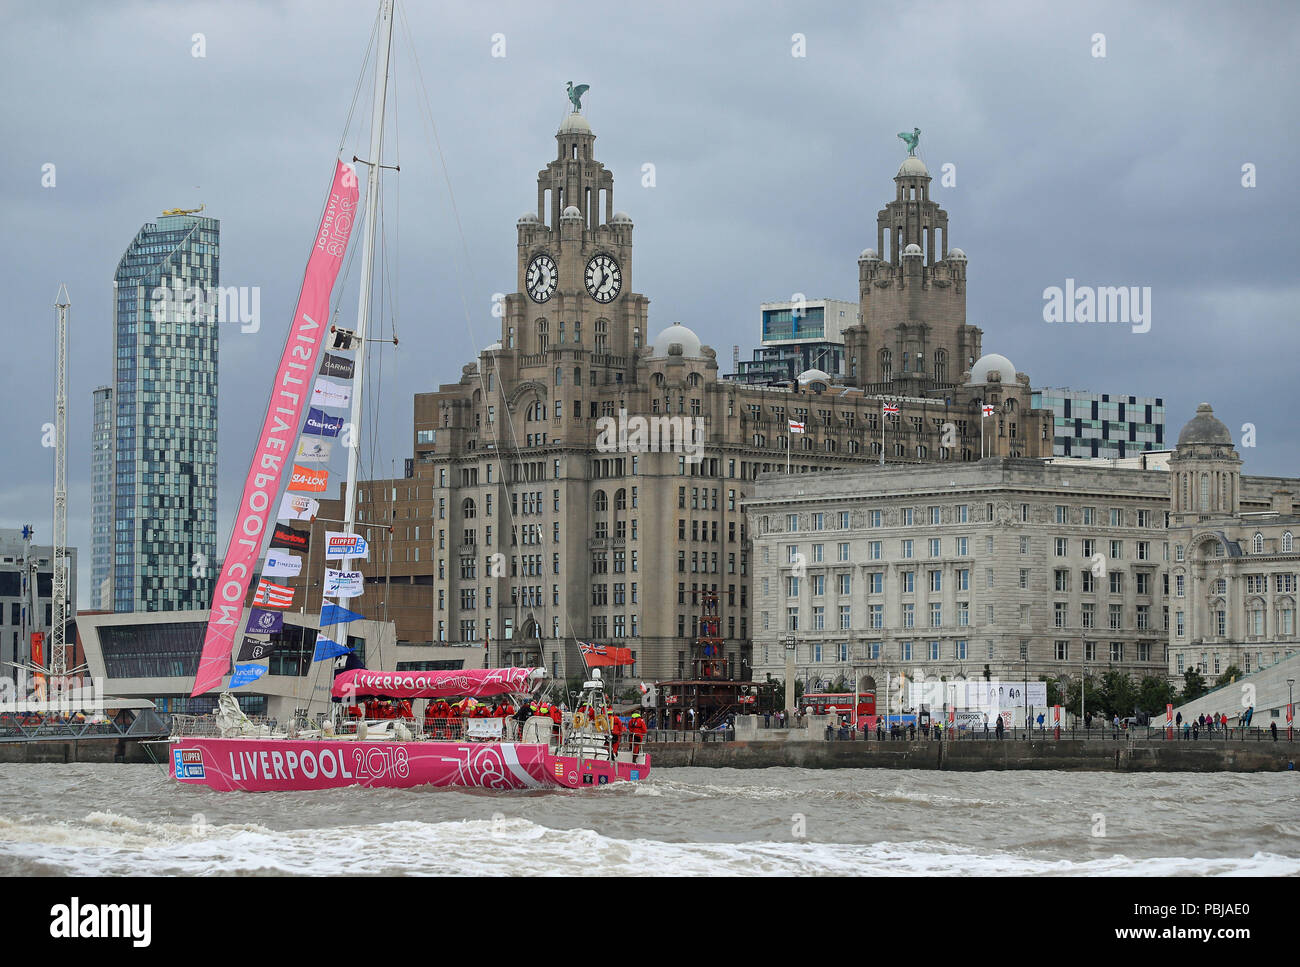 The Liverpool 2018 team arrives at the finish line after a "sprint finish" to conclude the Clipper 2017-2018 Round the World Yacht Race outside the Royal Albert Dock in Liverpool. Stock Photo